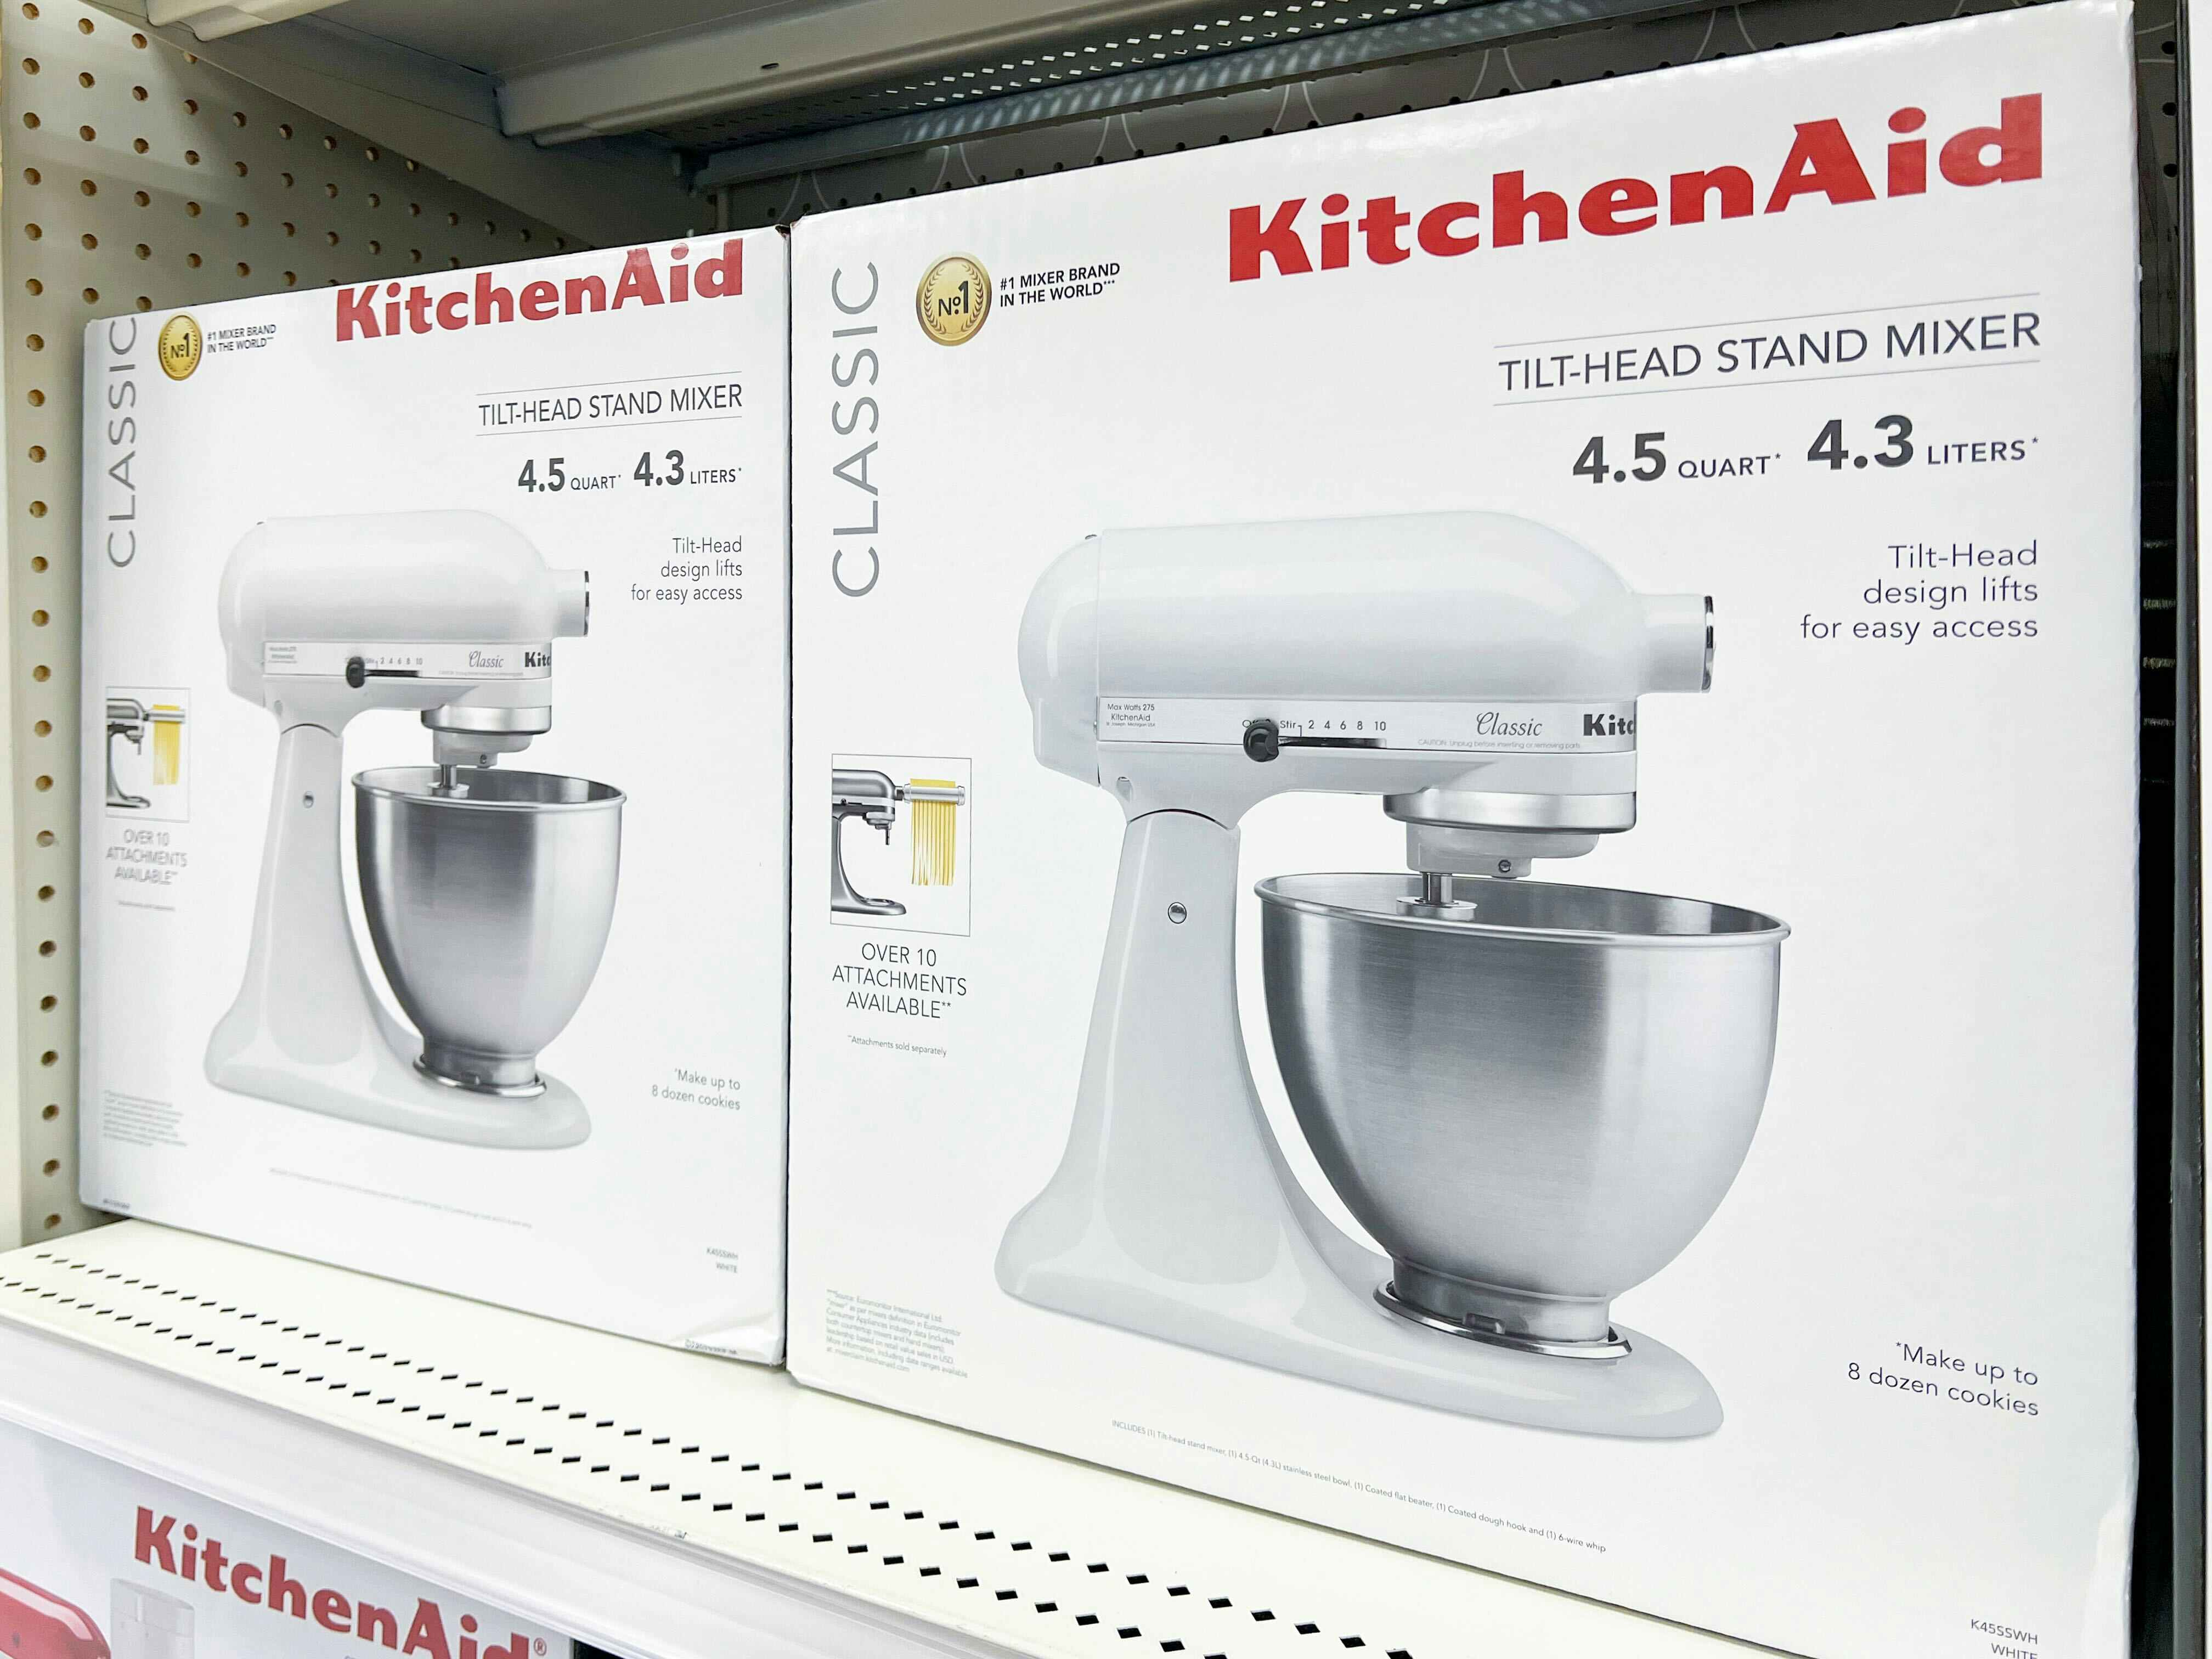 https://content-images.thekrazycouponlady.com/nie44ndm9bqr/Sru1OrXil2zLJydg7z4Aq/7b97bbe65529877fb20f670f094f5785/kitchenaid-stand-mixers-target1.jpg?auto=format&fit=max&w=4032&q=25